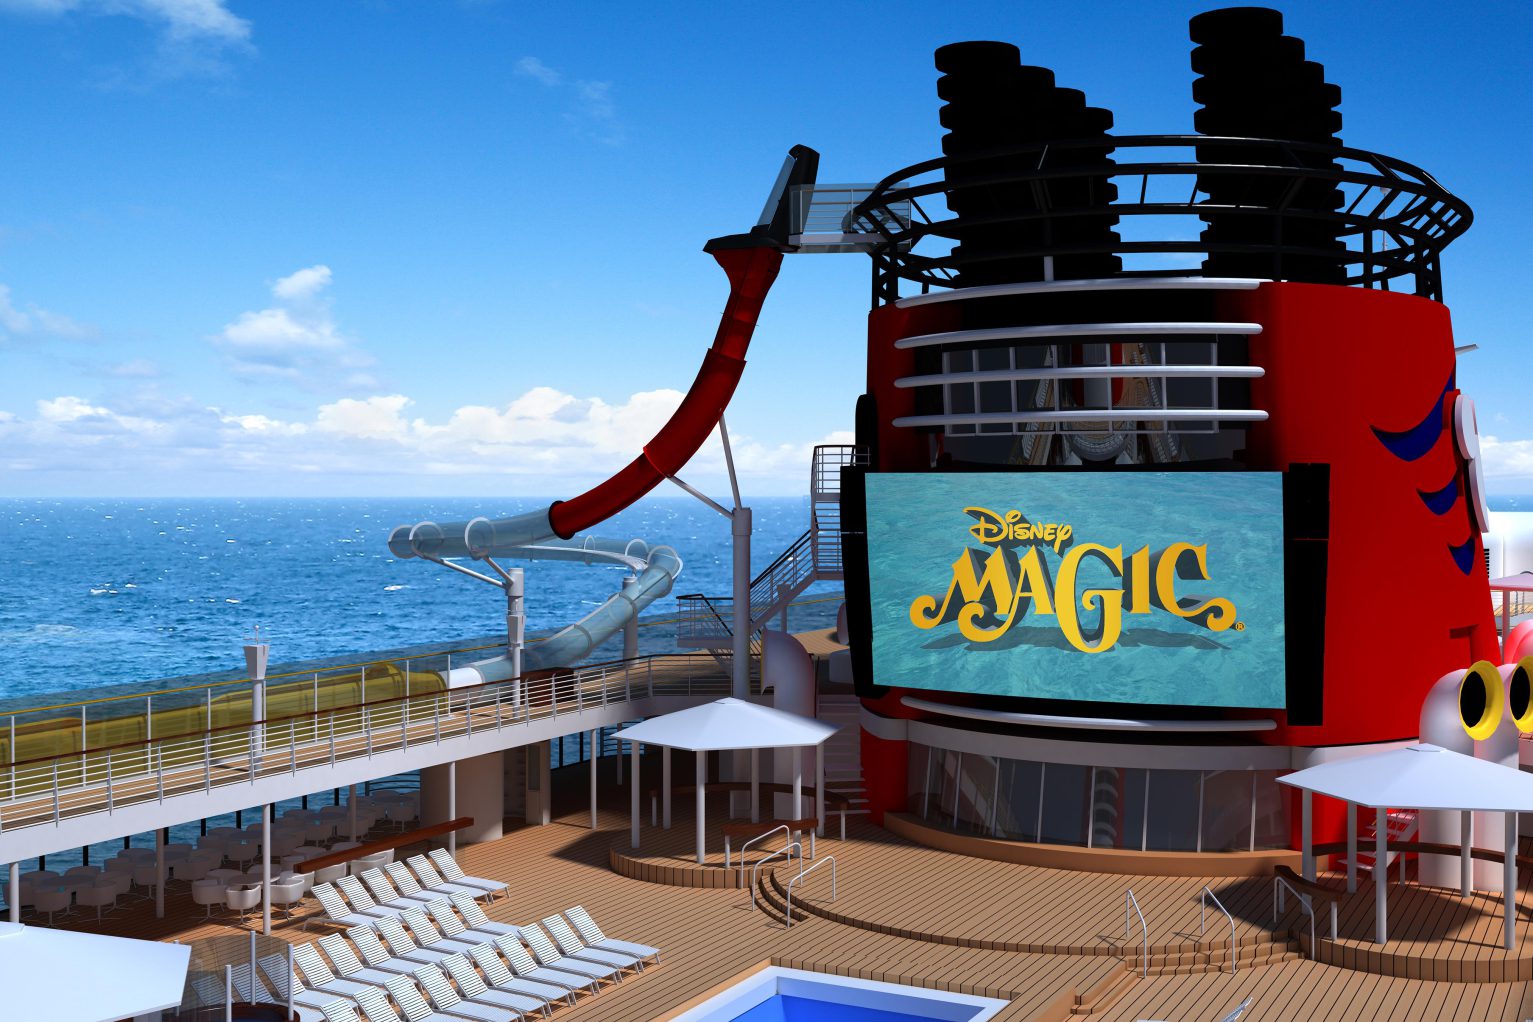 Experience Disney Magic without vax requirements. 